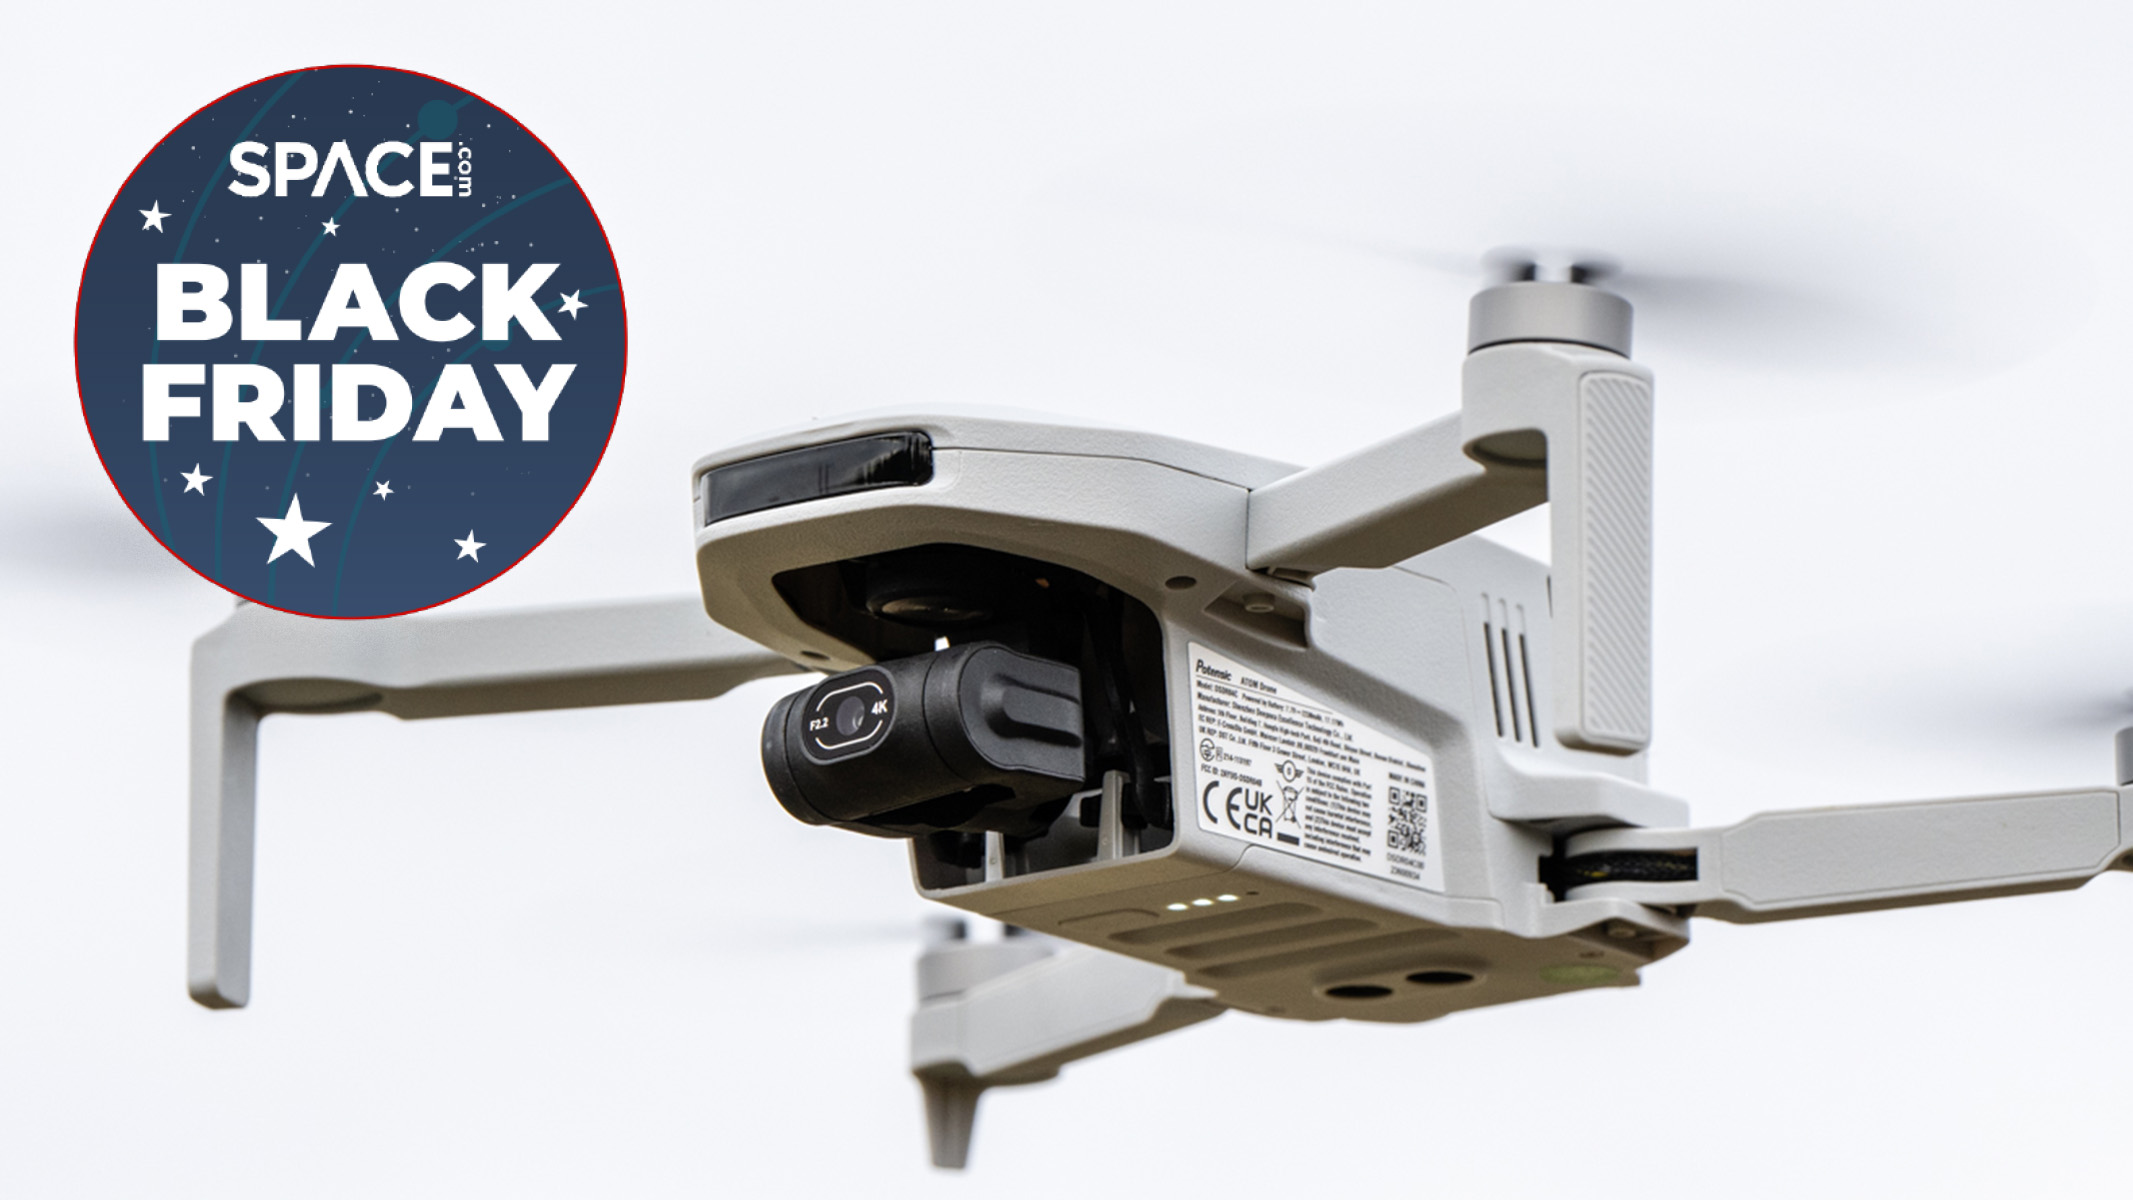 Black Friday weekend: Save $80 on this fantastic Potensic ATOM drone Space